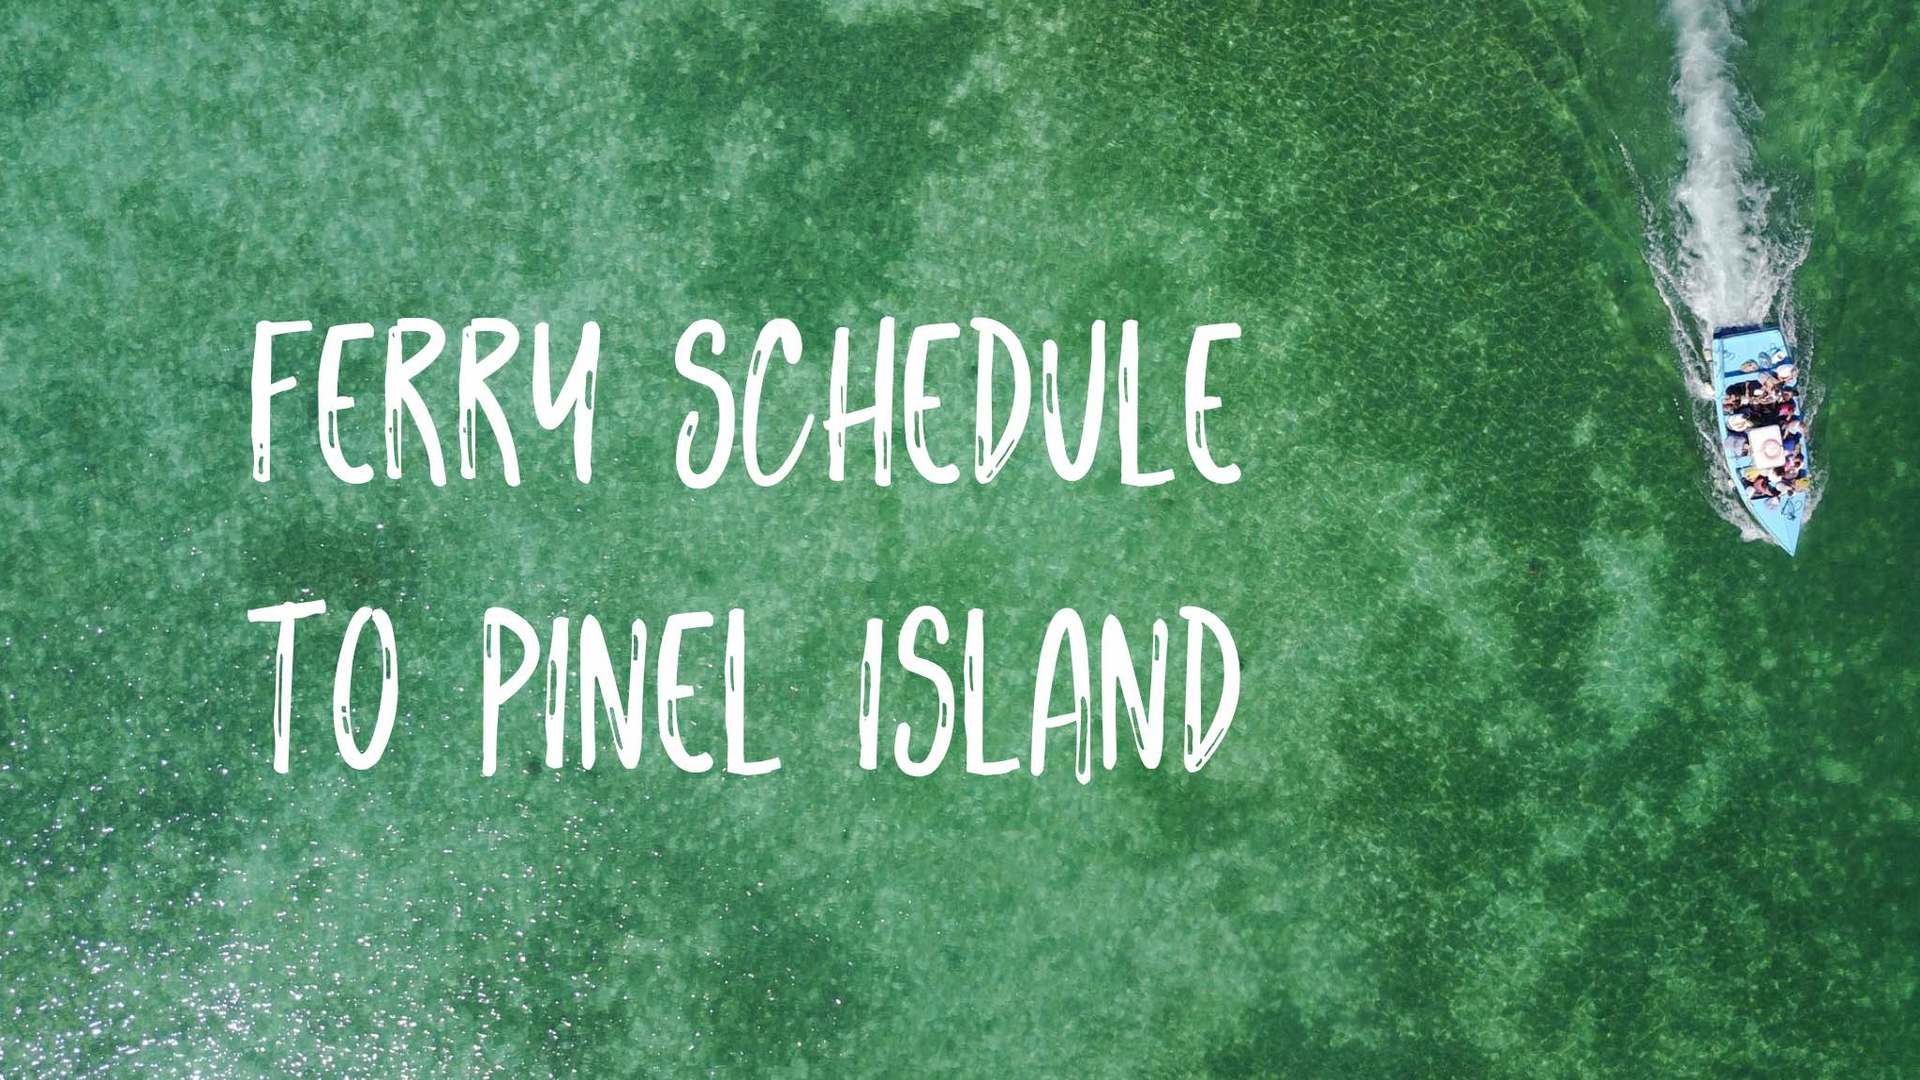 A small Caribbean ferry is going to Pinel island